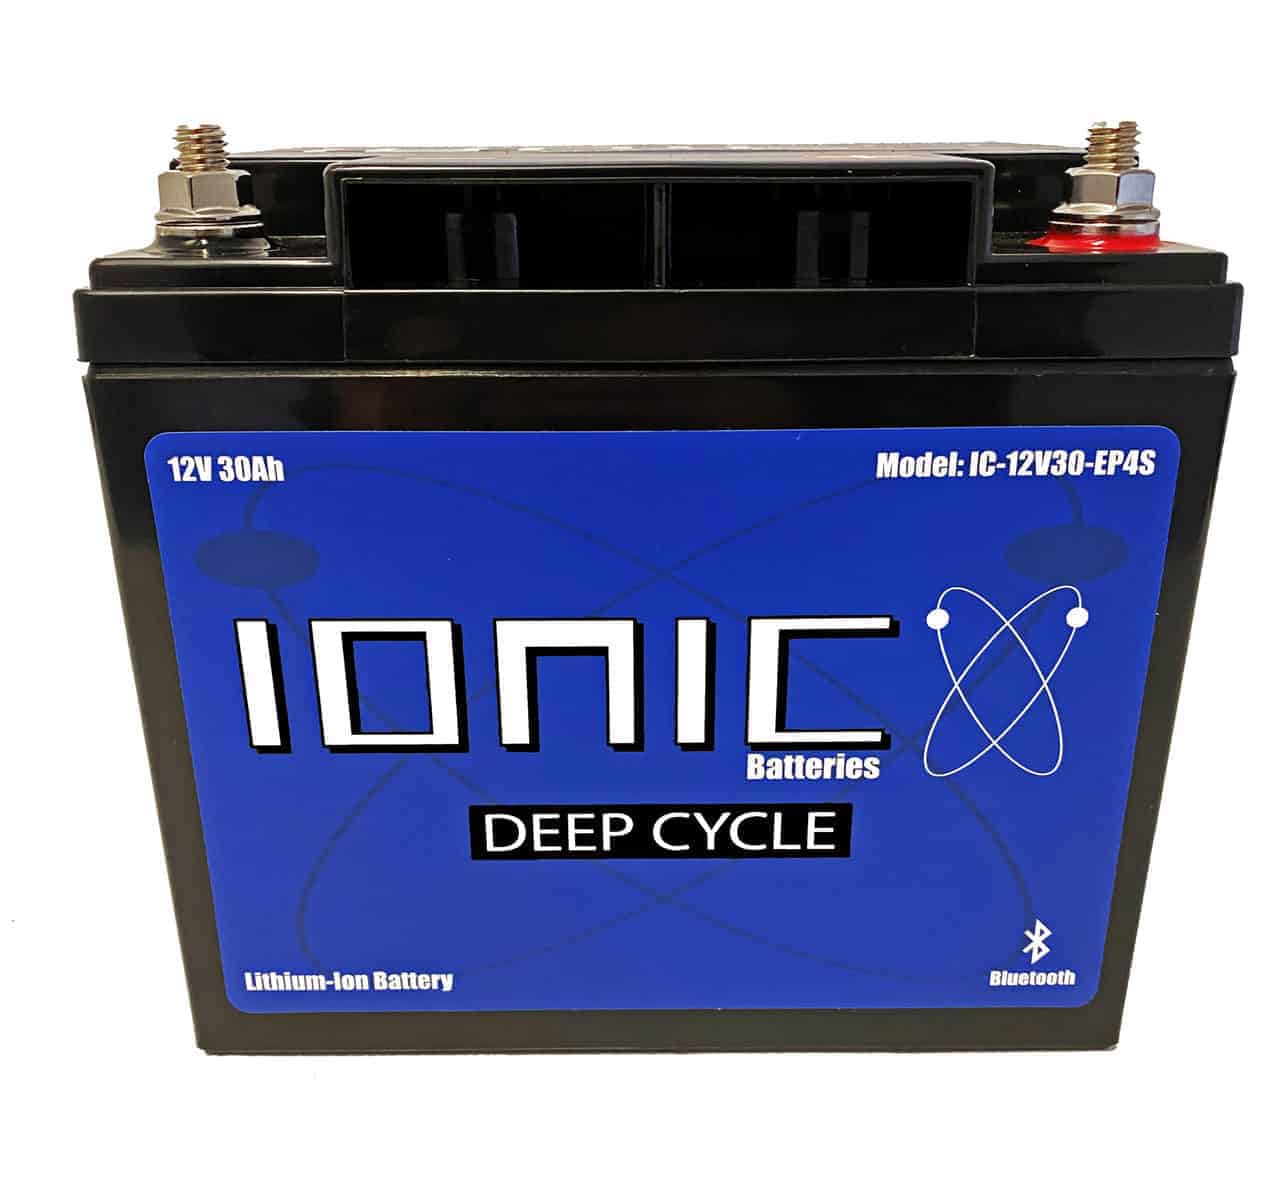 100 amp hour lithium battery